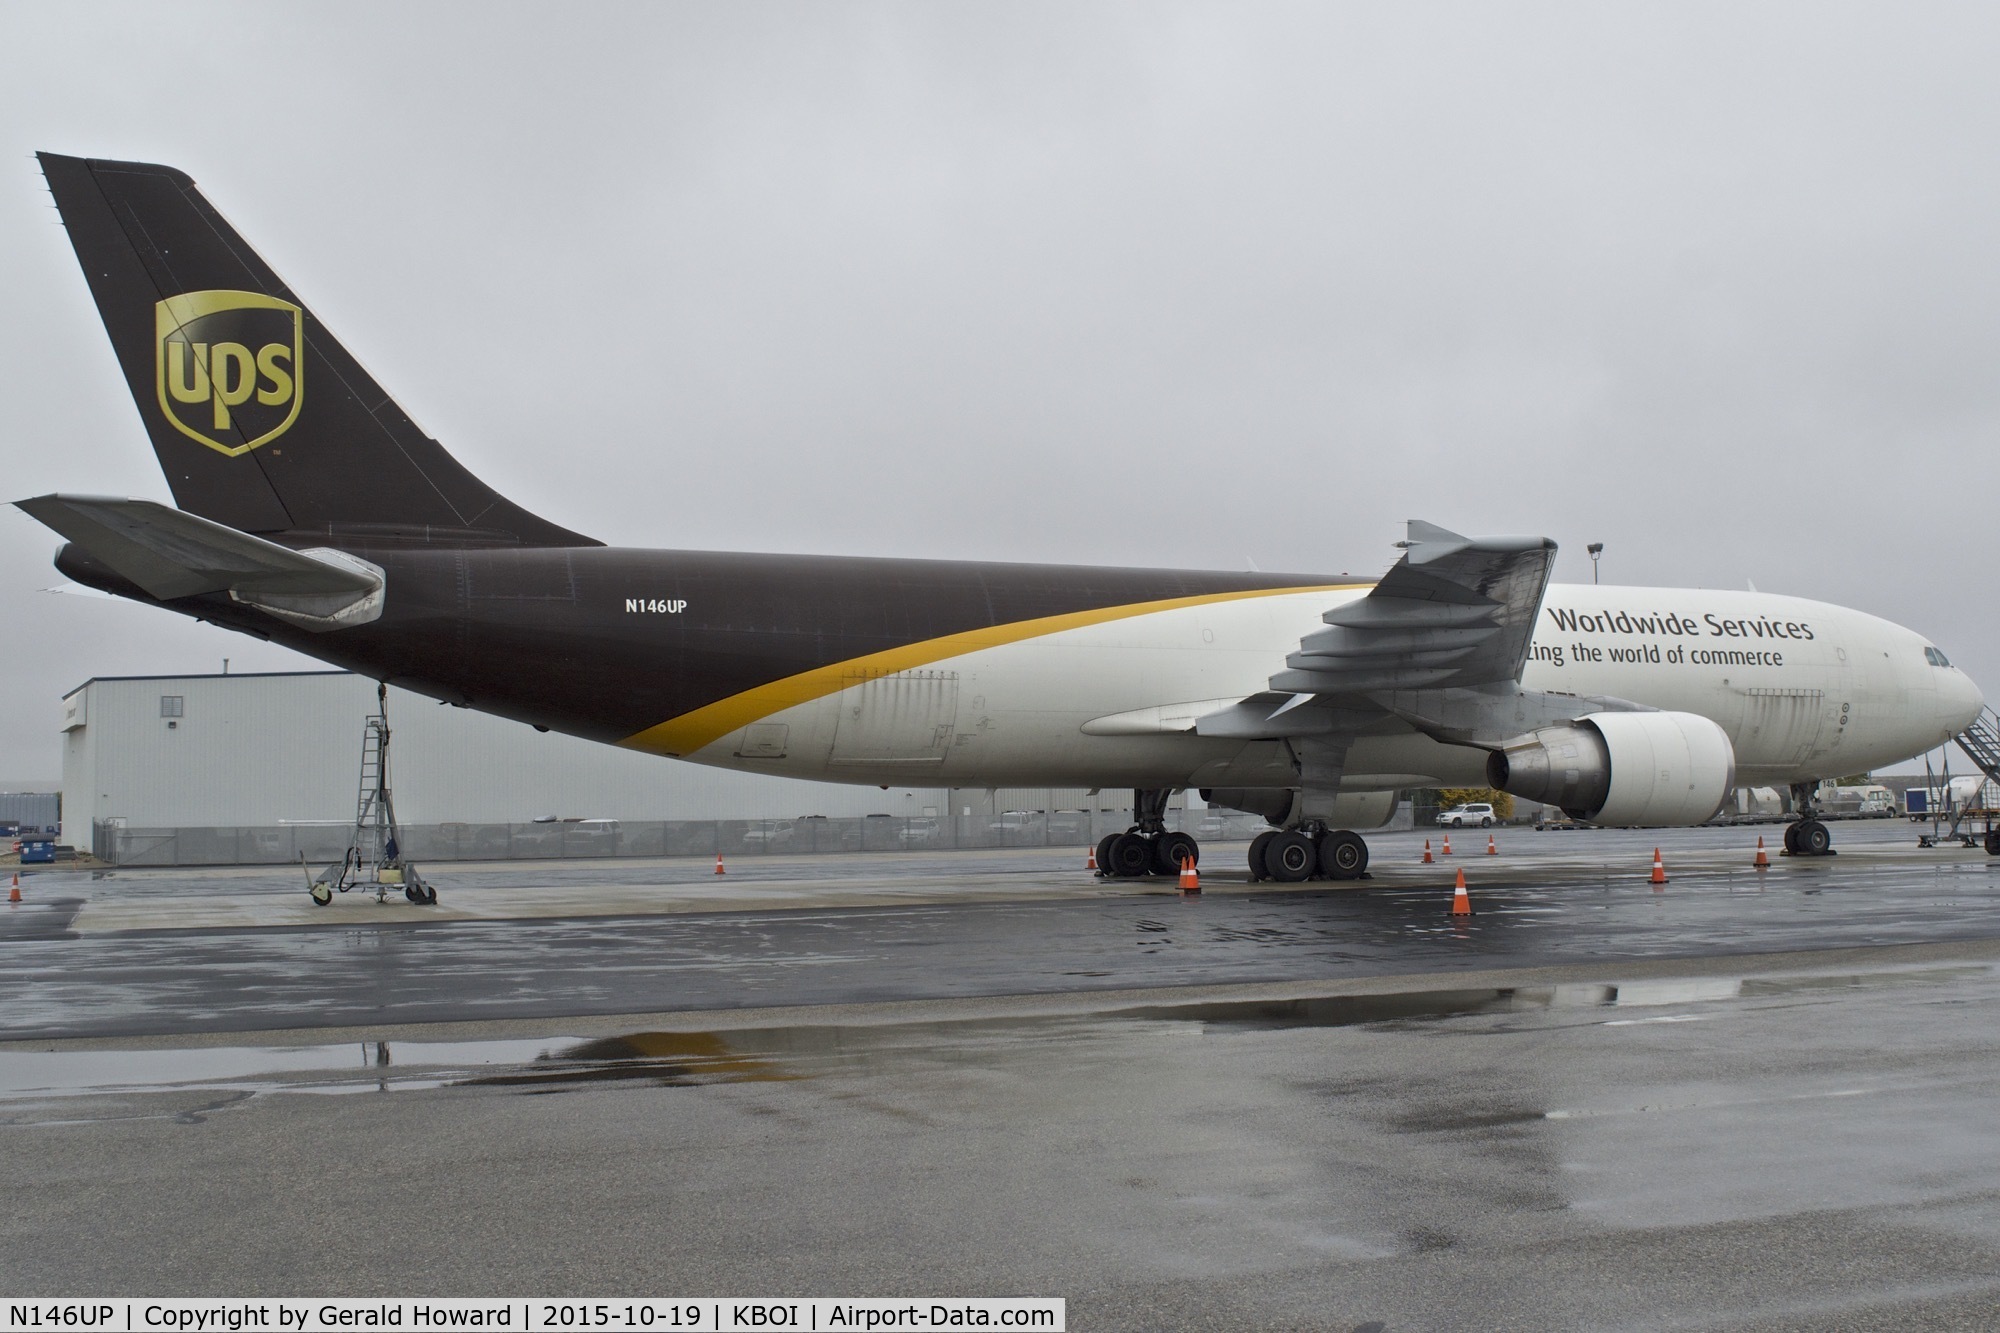 N146UP, 2003 Airbus A300F4-622R C/N 829, Parked on UPS ramp.